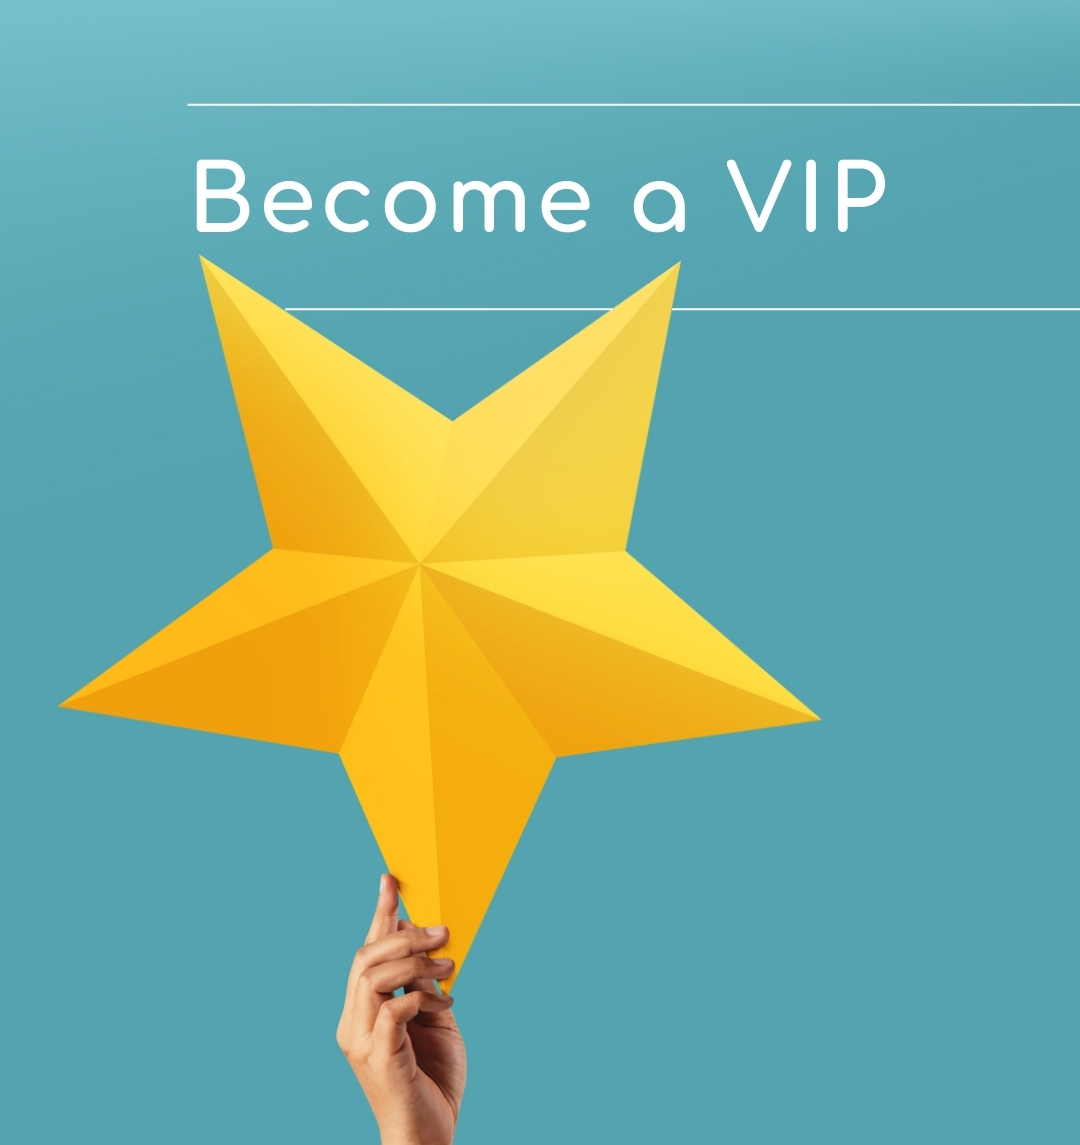 A hand is holding up a large, stylized golden star against a teal background. White text above the star reads "Become a VIP." The design, reminiscent of a luxurious spa in Madison WI, has a clean and minimalistic appearance that exudes beauty and elegance.